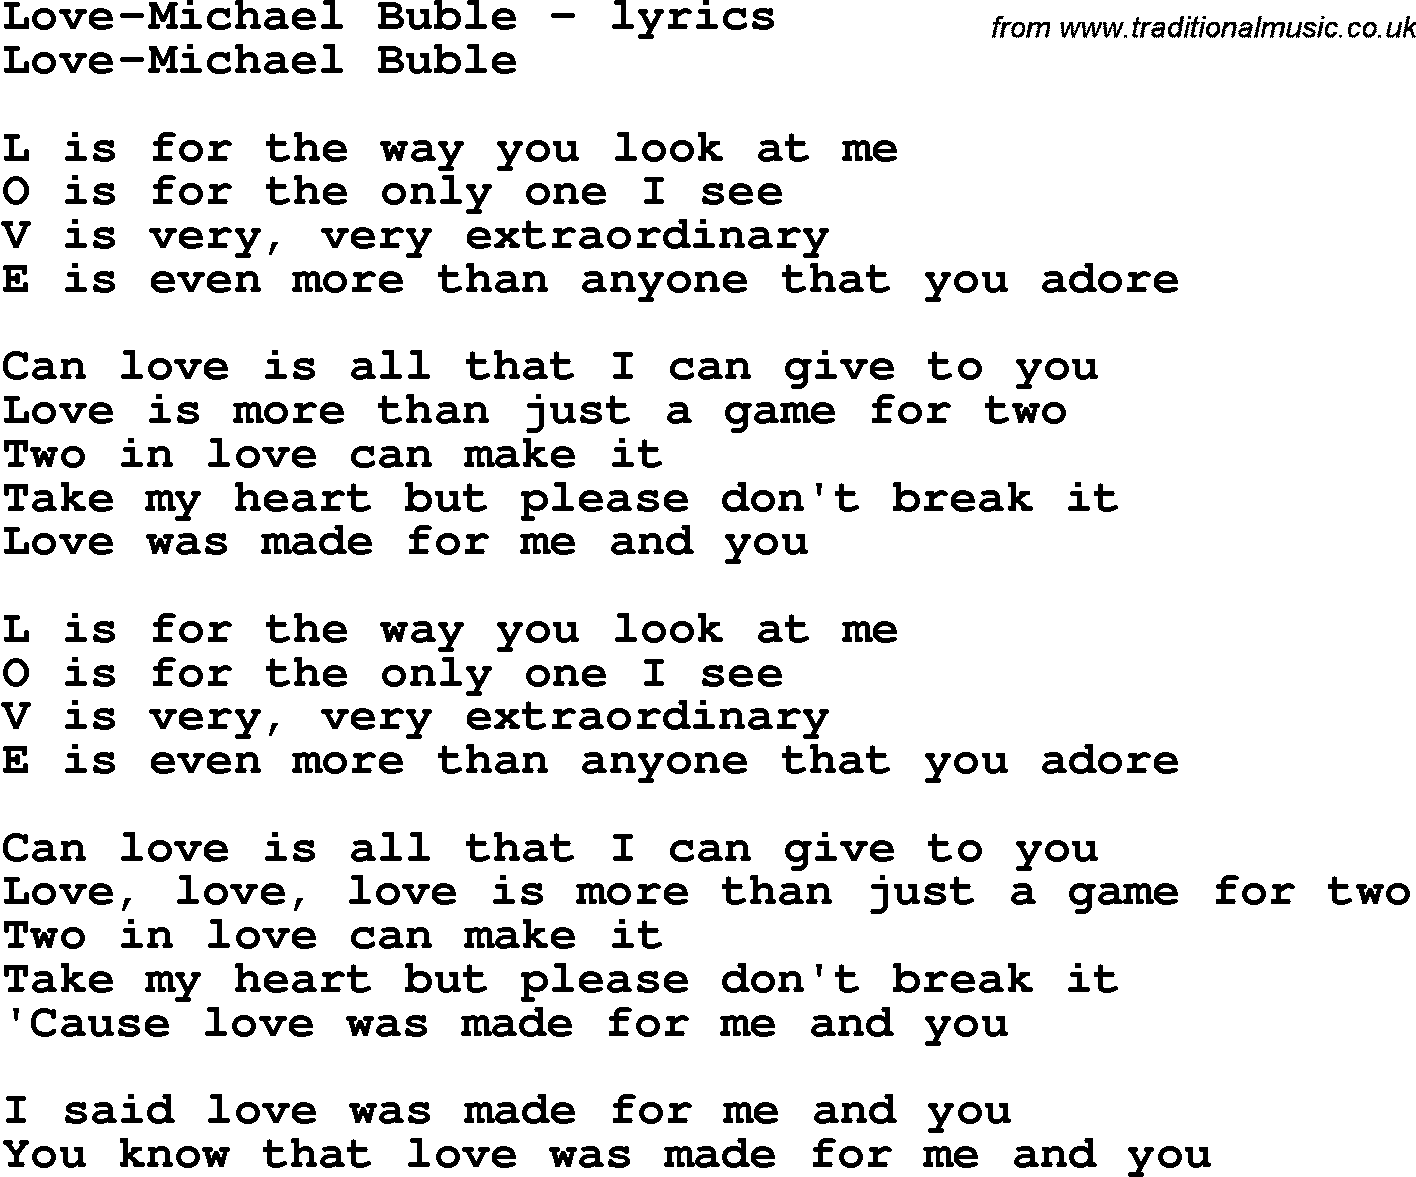 Love Song Lyrics For Love Michael Buble Michael buble christmas (baby please come home) lyrics. traditional music library